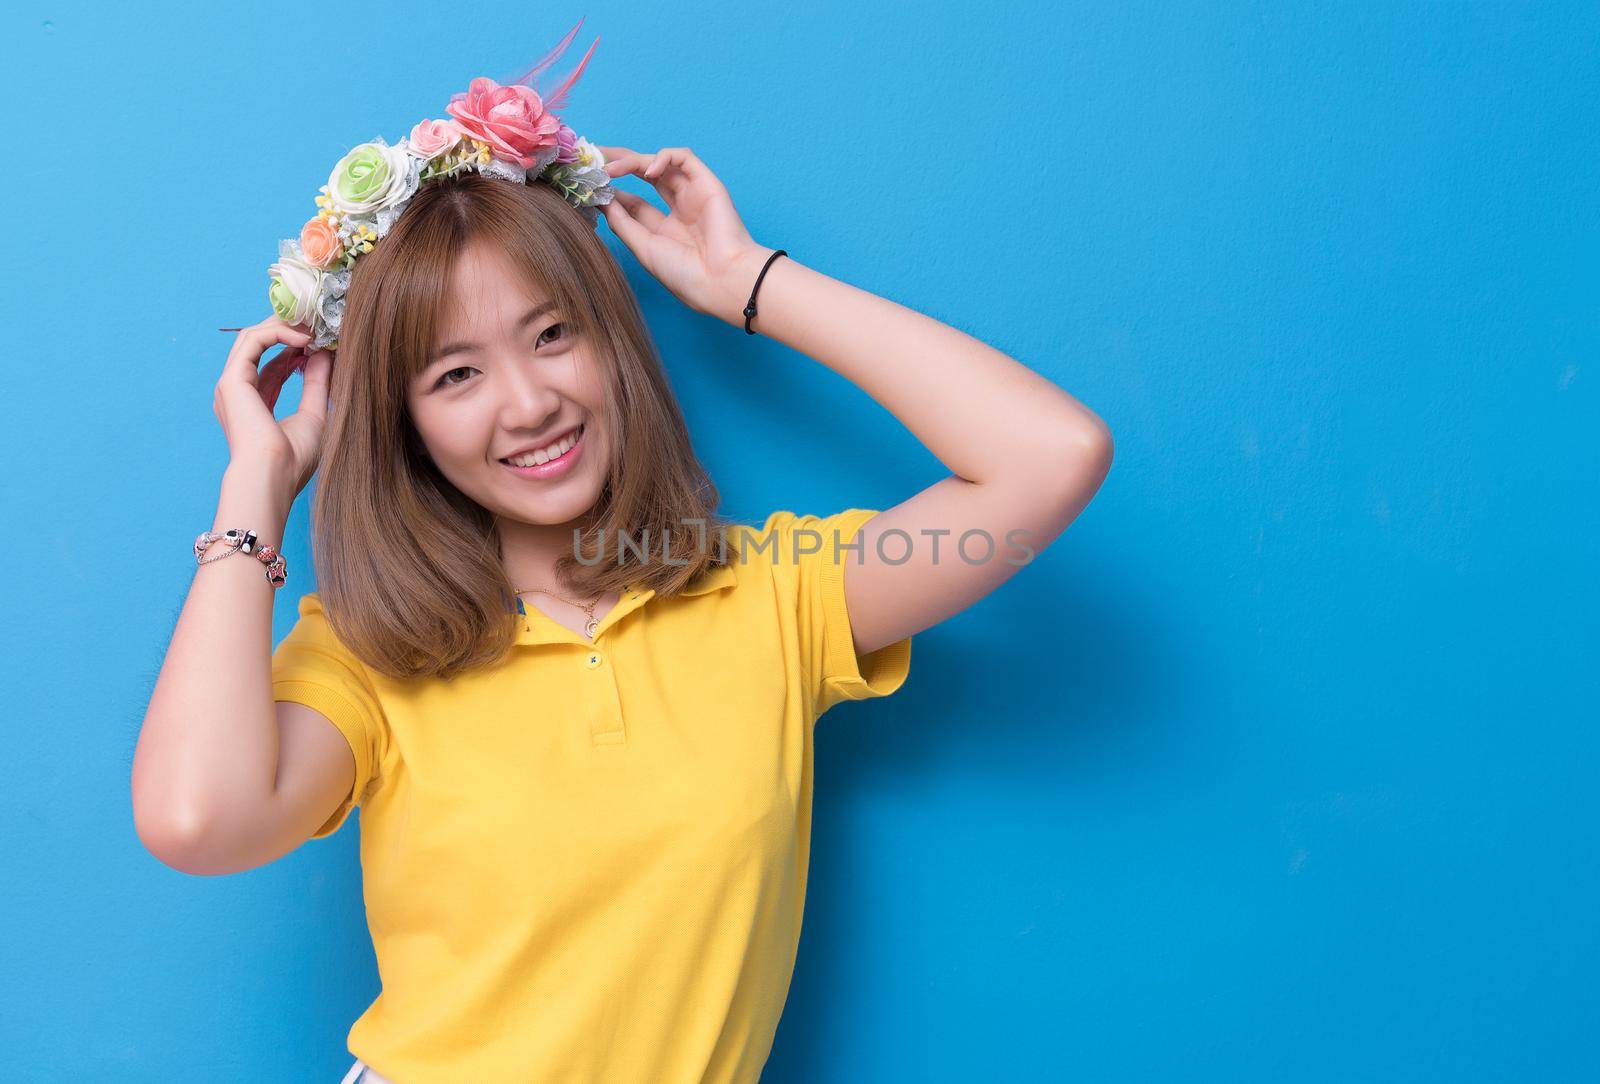 Beauty woman posing with flower hat in front of blue wall background. Summer and vintage concept. Happiness lifestyle and people portrait theme. Cute gesture and pastel tone.